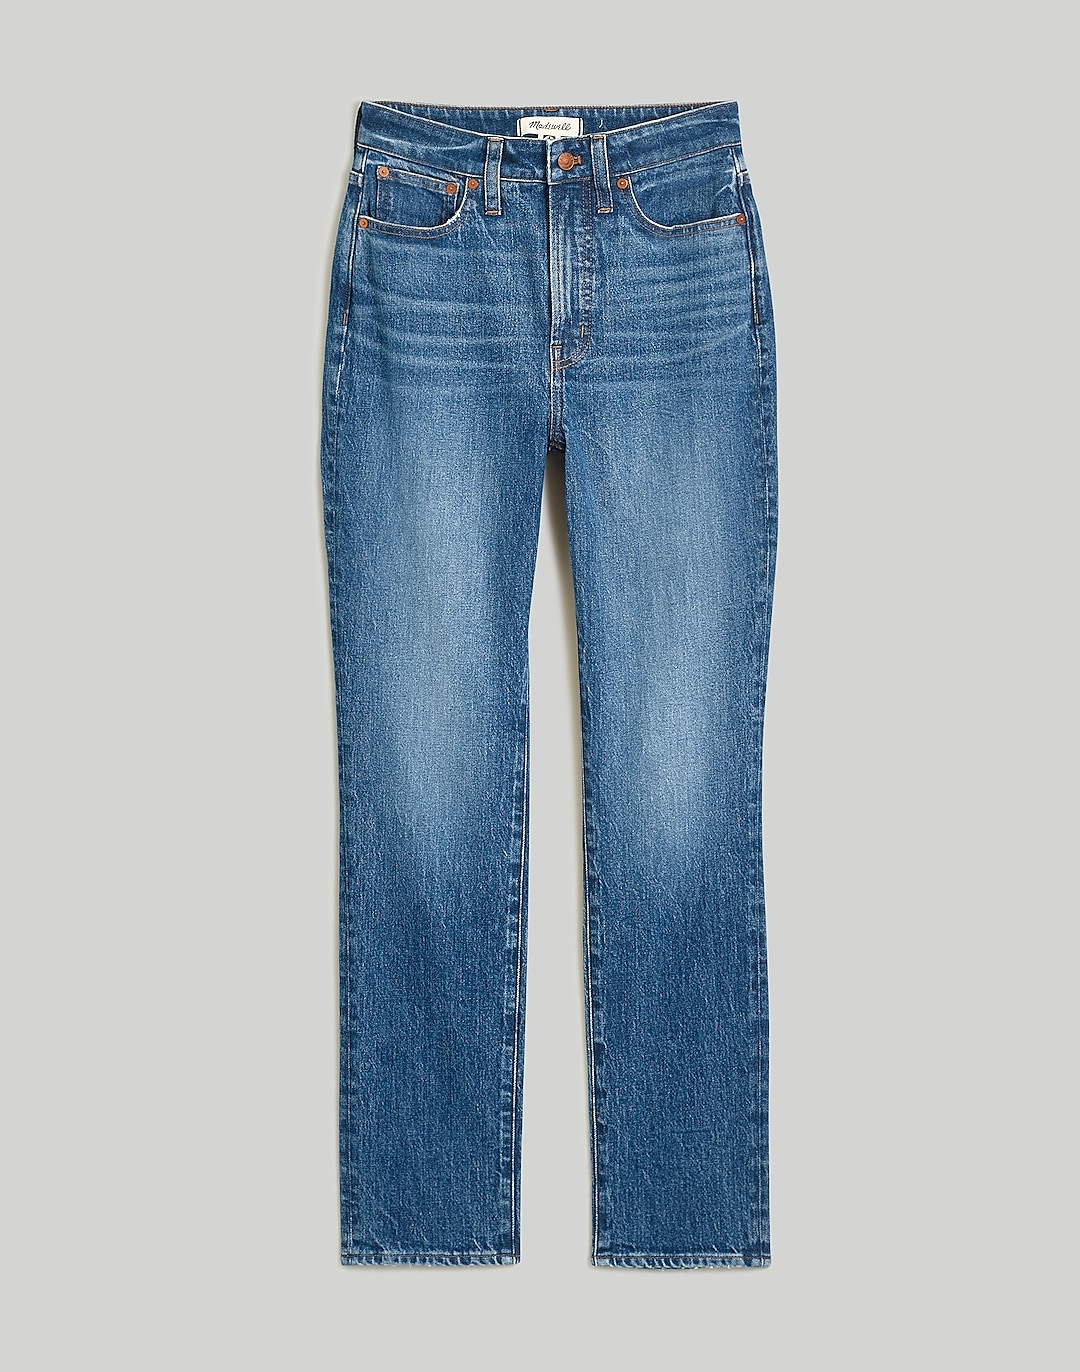 The Perfect Vintage Jean in Decatur Wash | Madewell